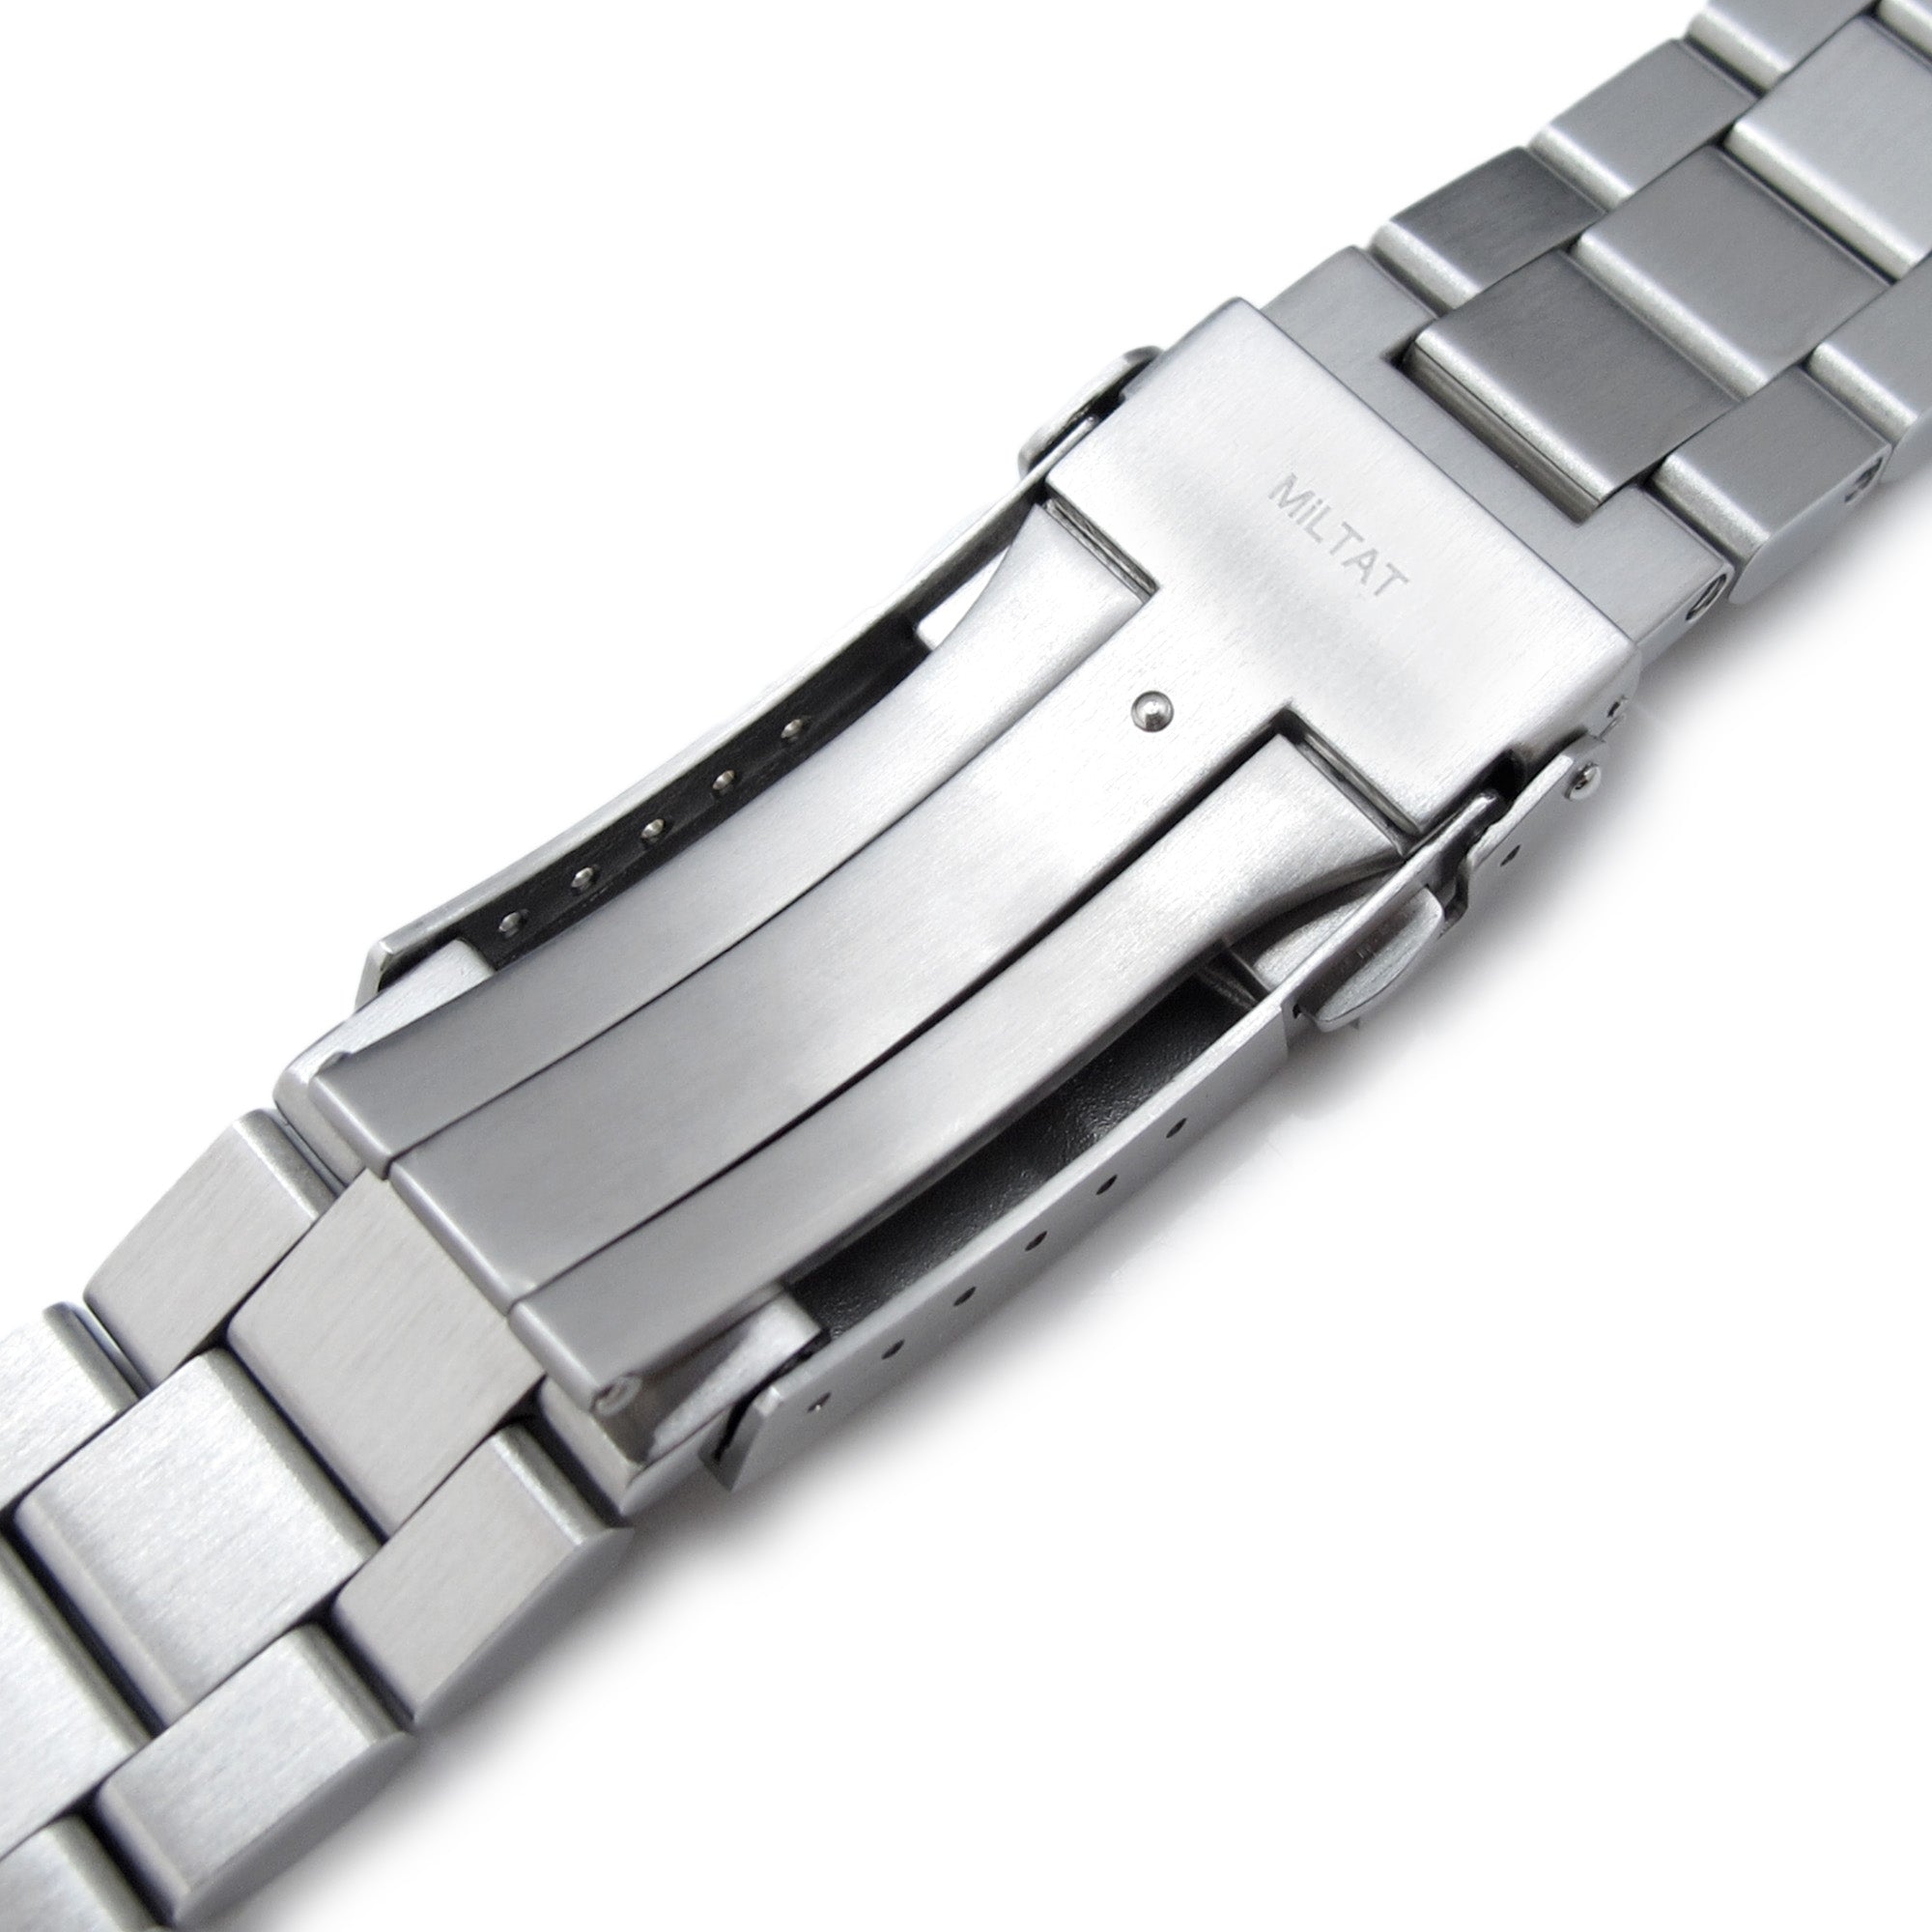 22mm Hexad Watch Band for Seiko New Turtles SRP777 & PADI SRPA21, 316L Stainless Steel Polished & Brushed SUB Clasp